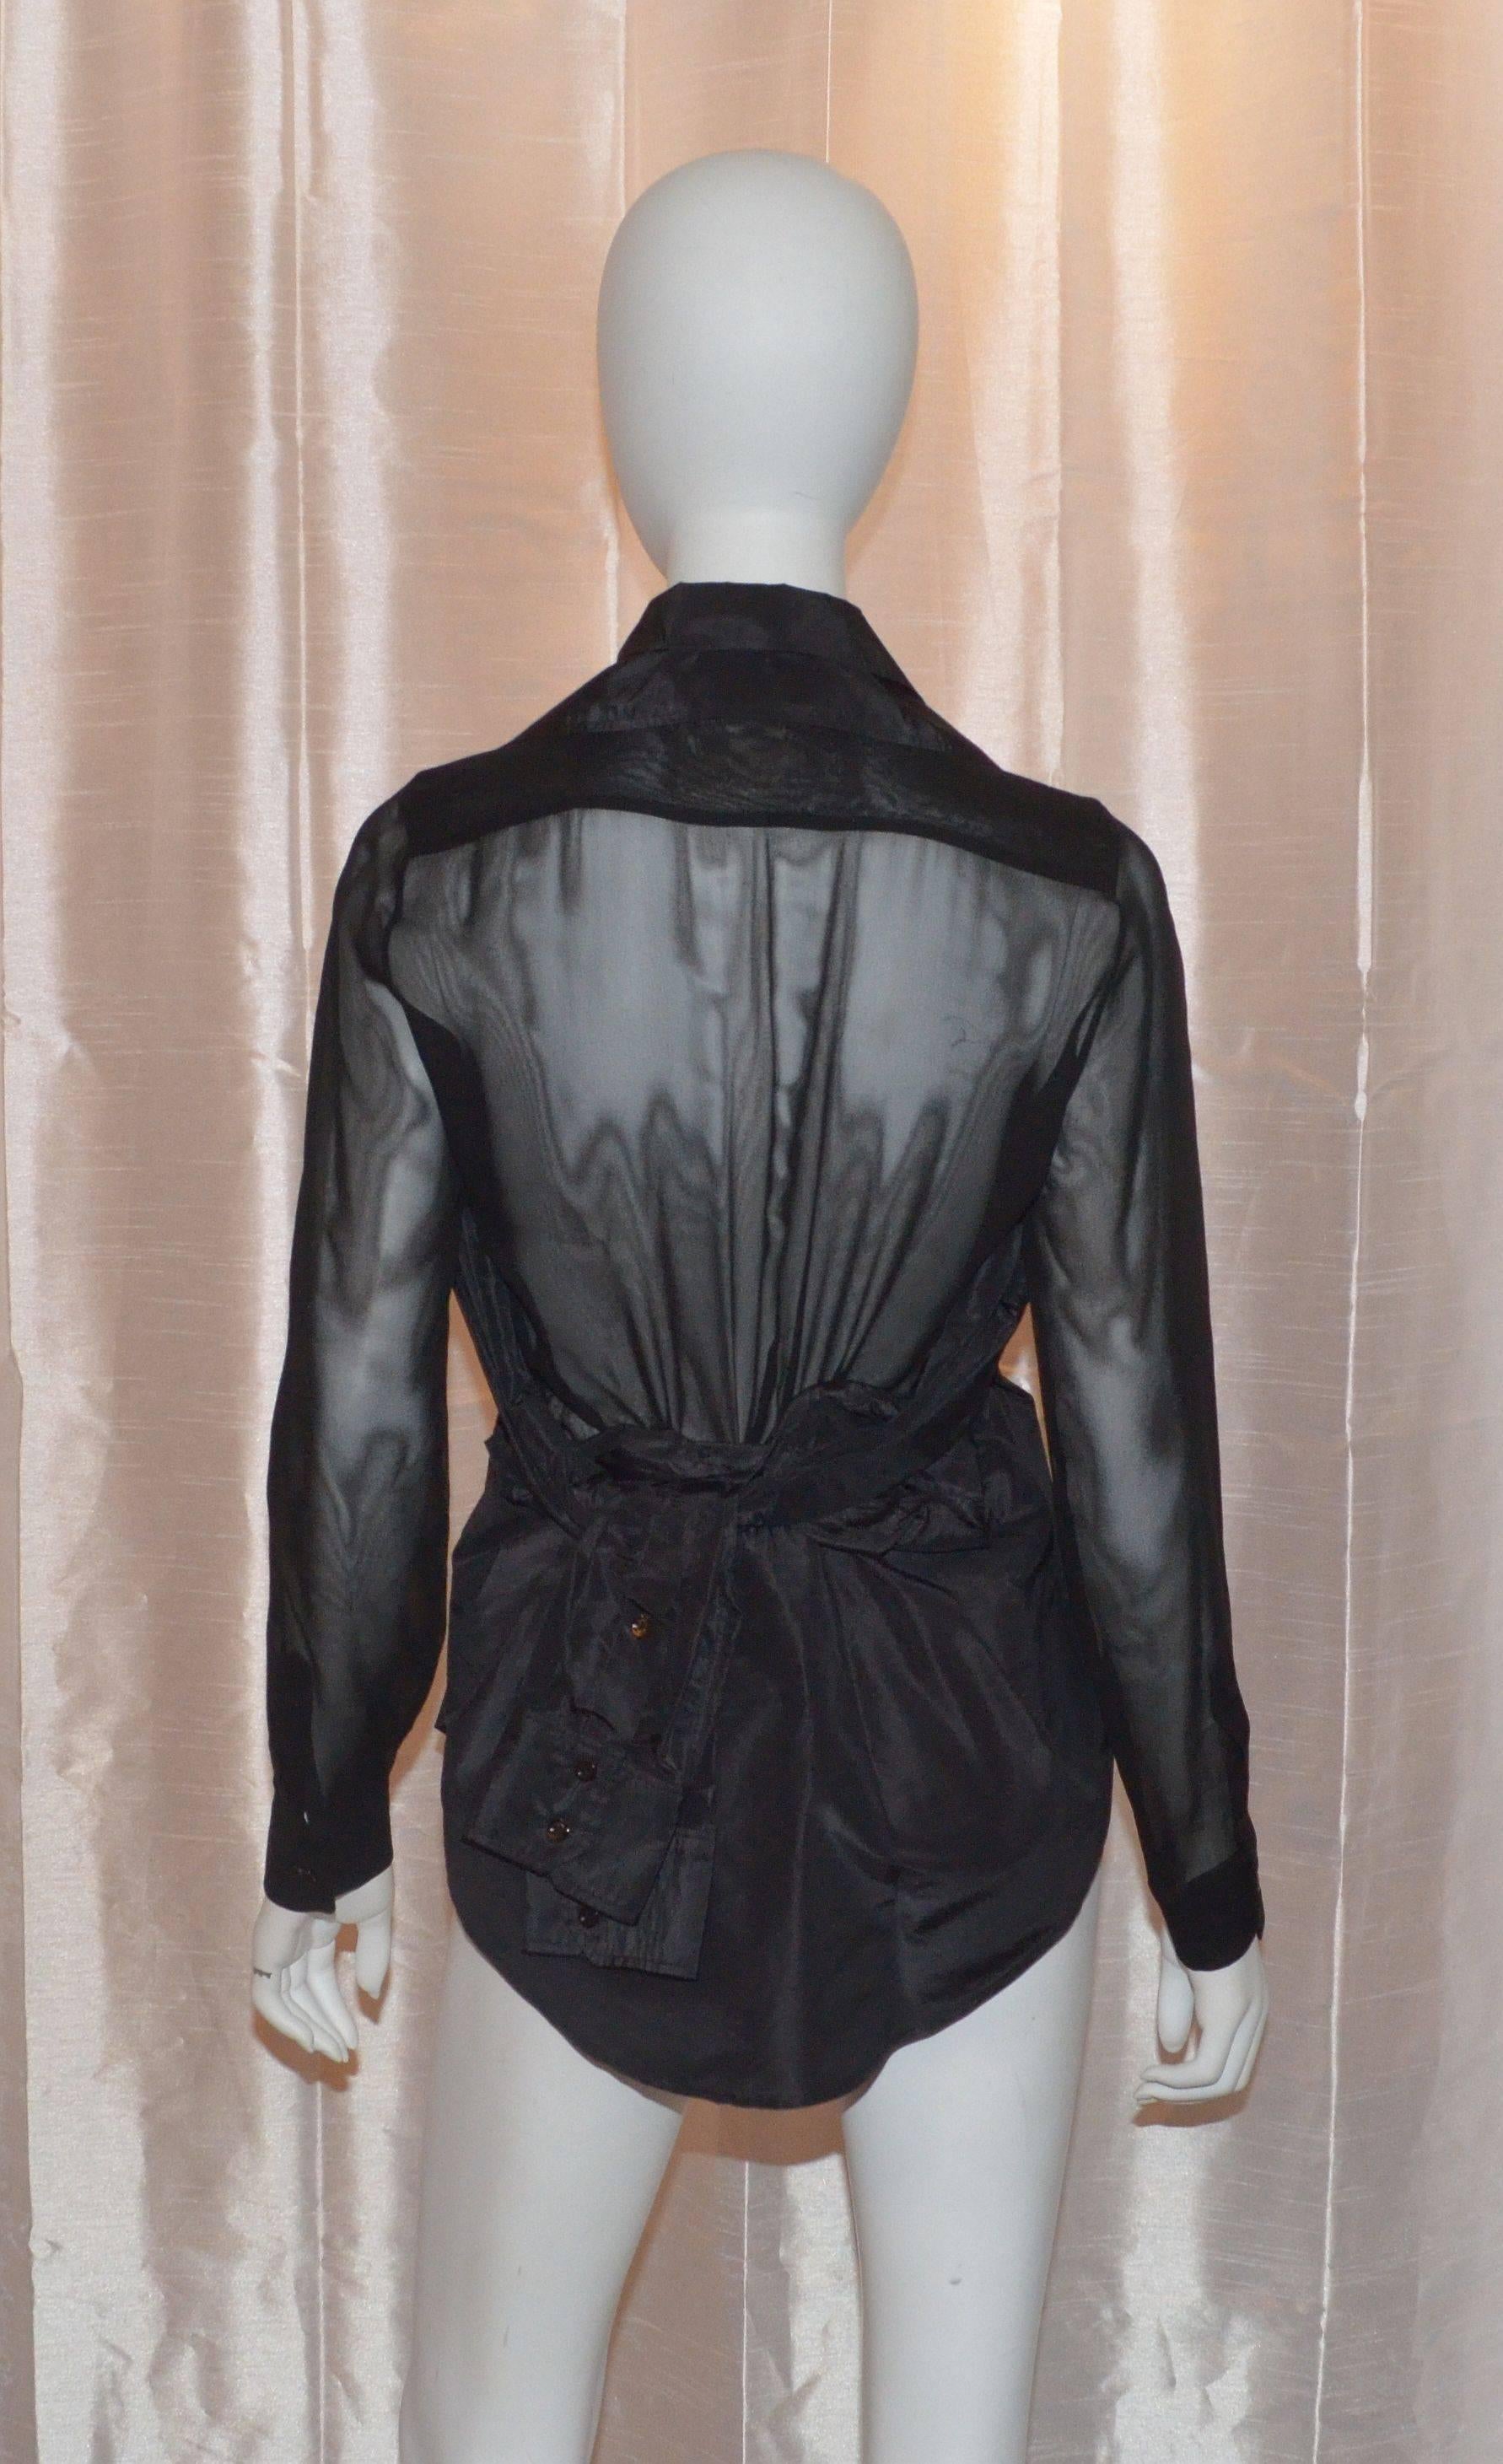 Black Moschino Silk Chiffon Blouse with Sleeves That Tie at the Waist